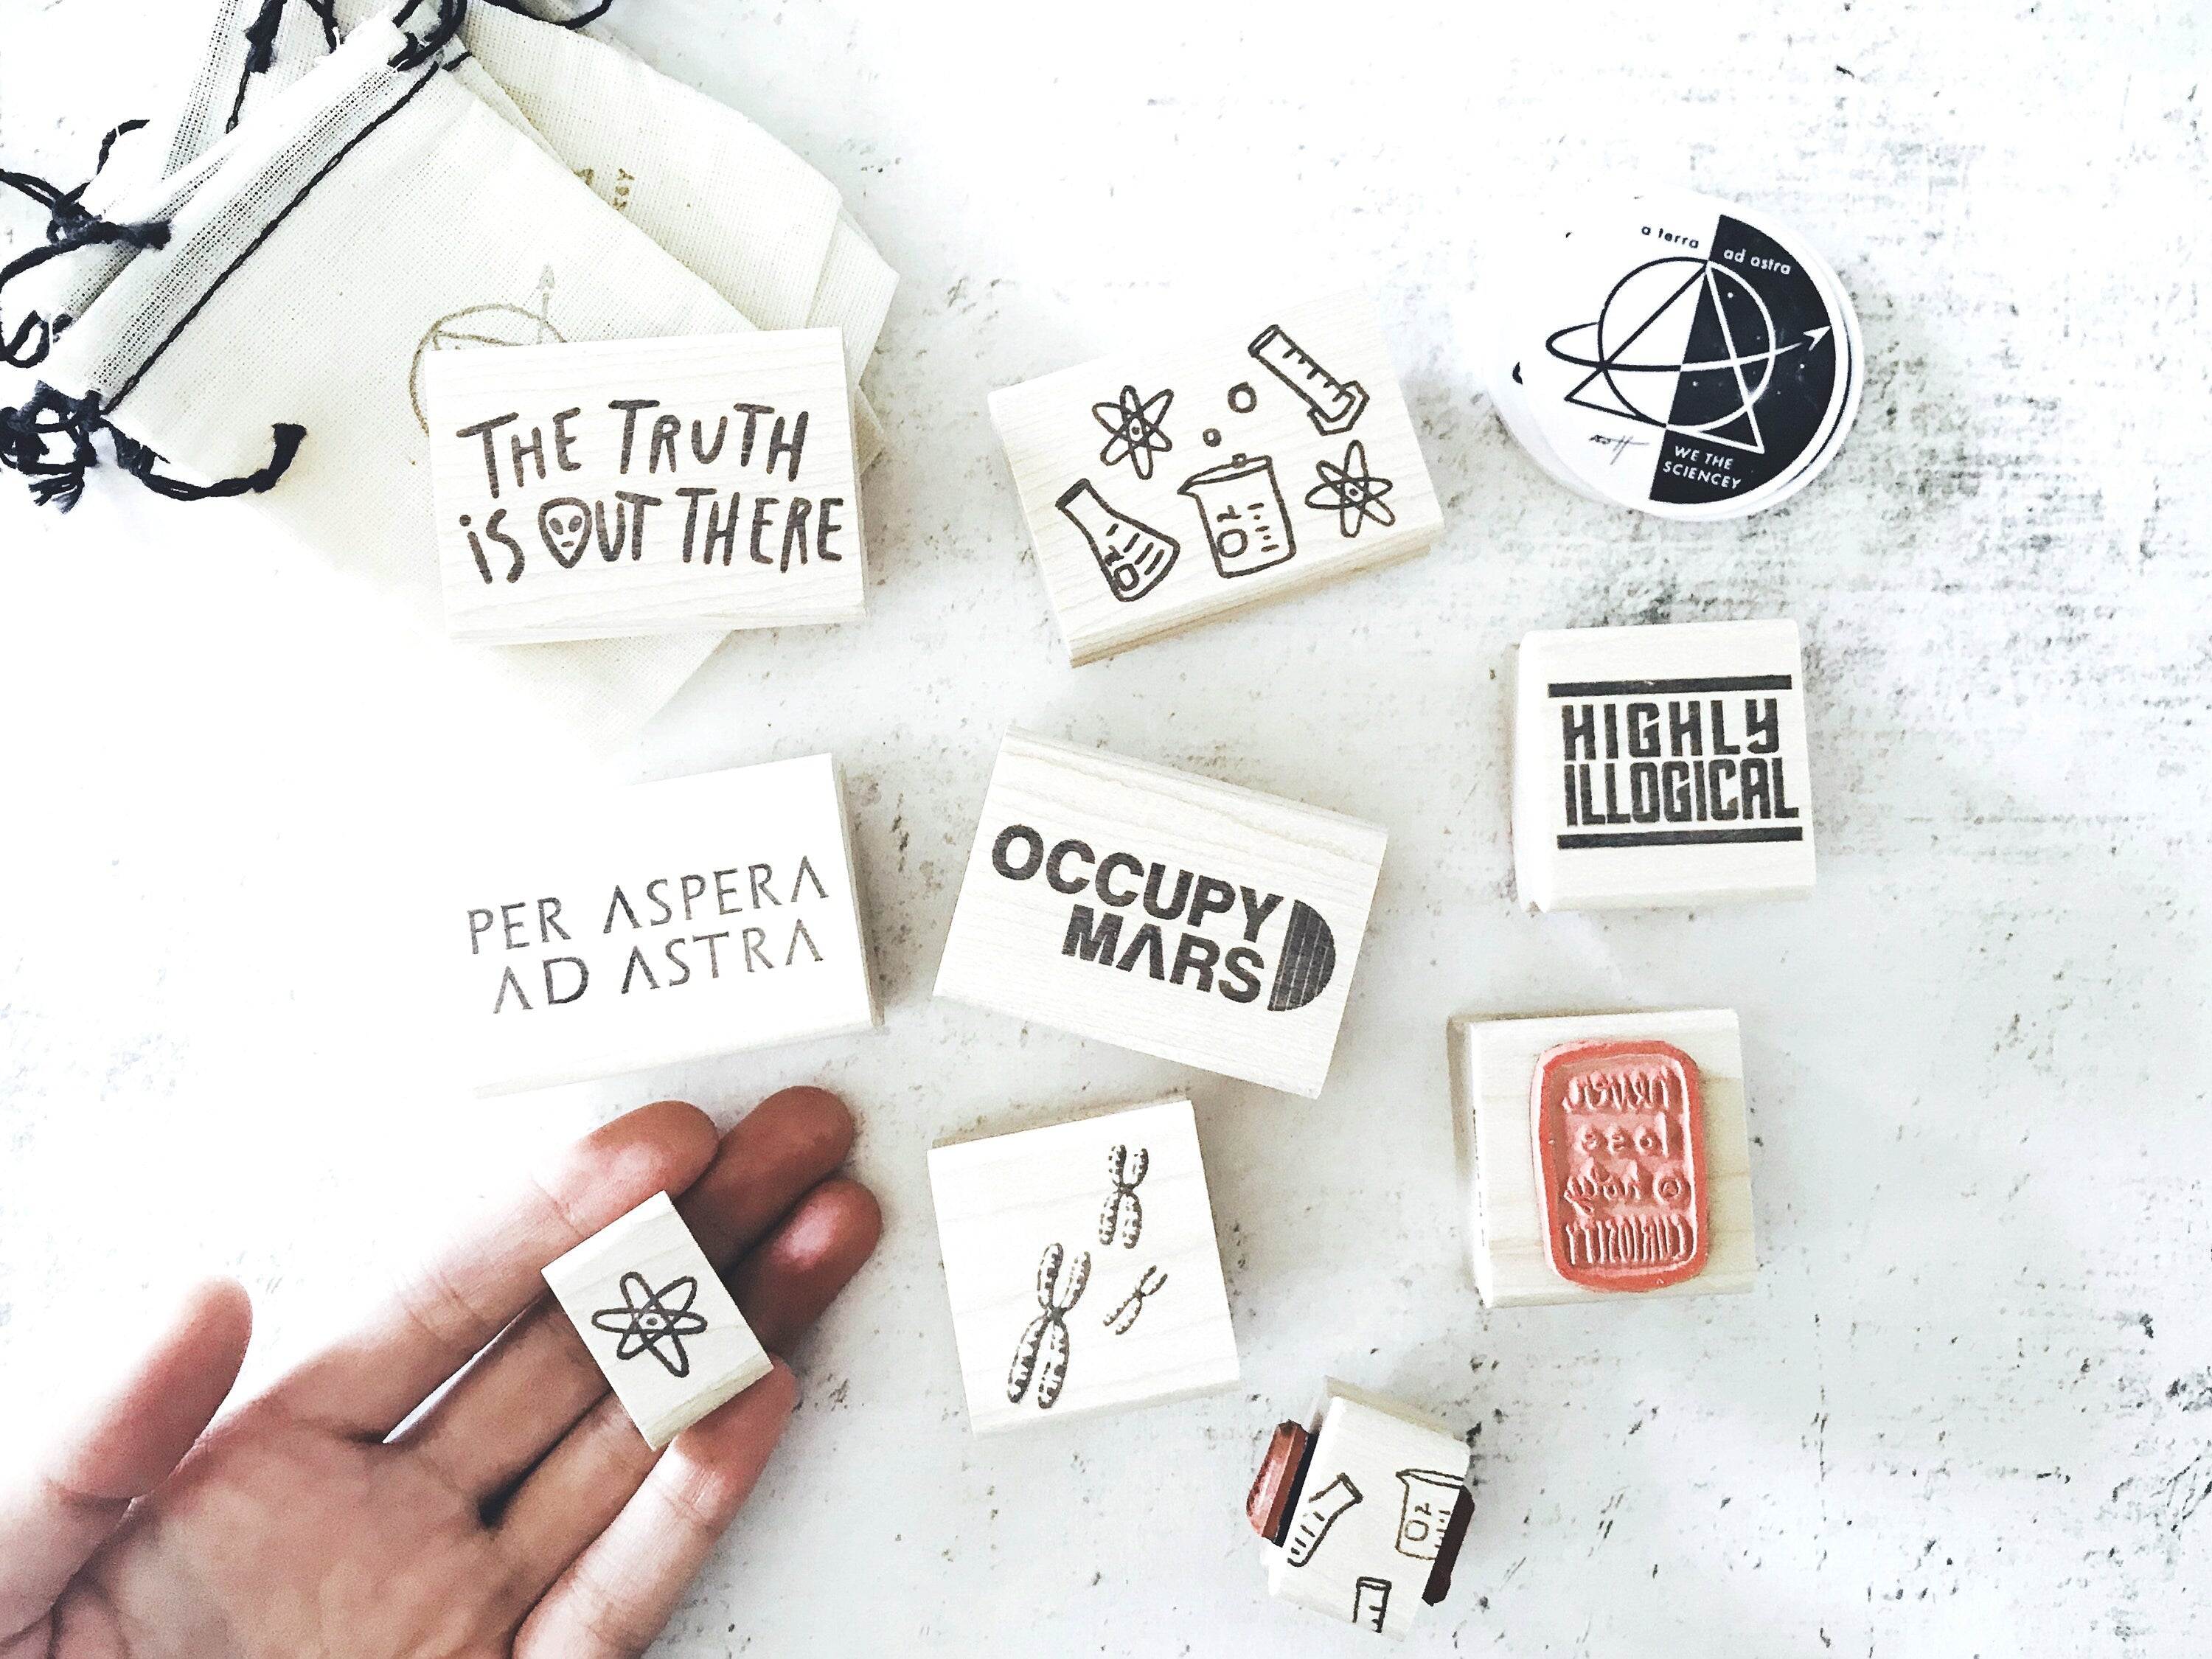 Star Stuff Jar Rubber Stamp - Celestial Astronomy Bujo - Made of Stars Space Stationery